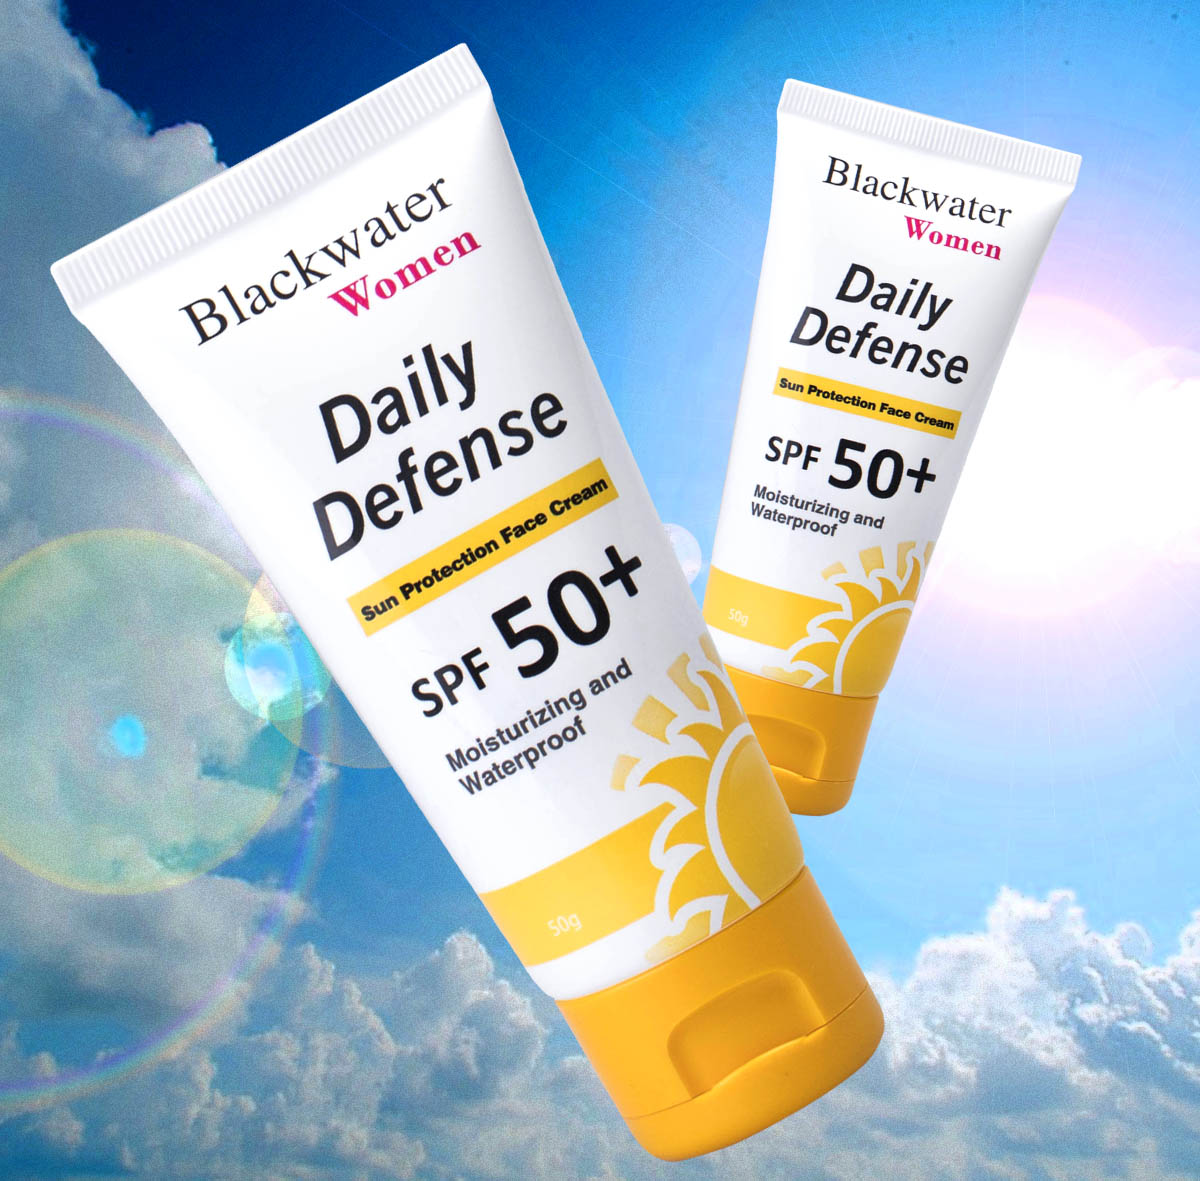 Get sun protection for your face with Blackwater Women